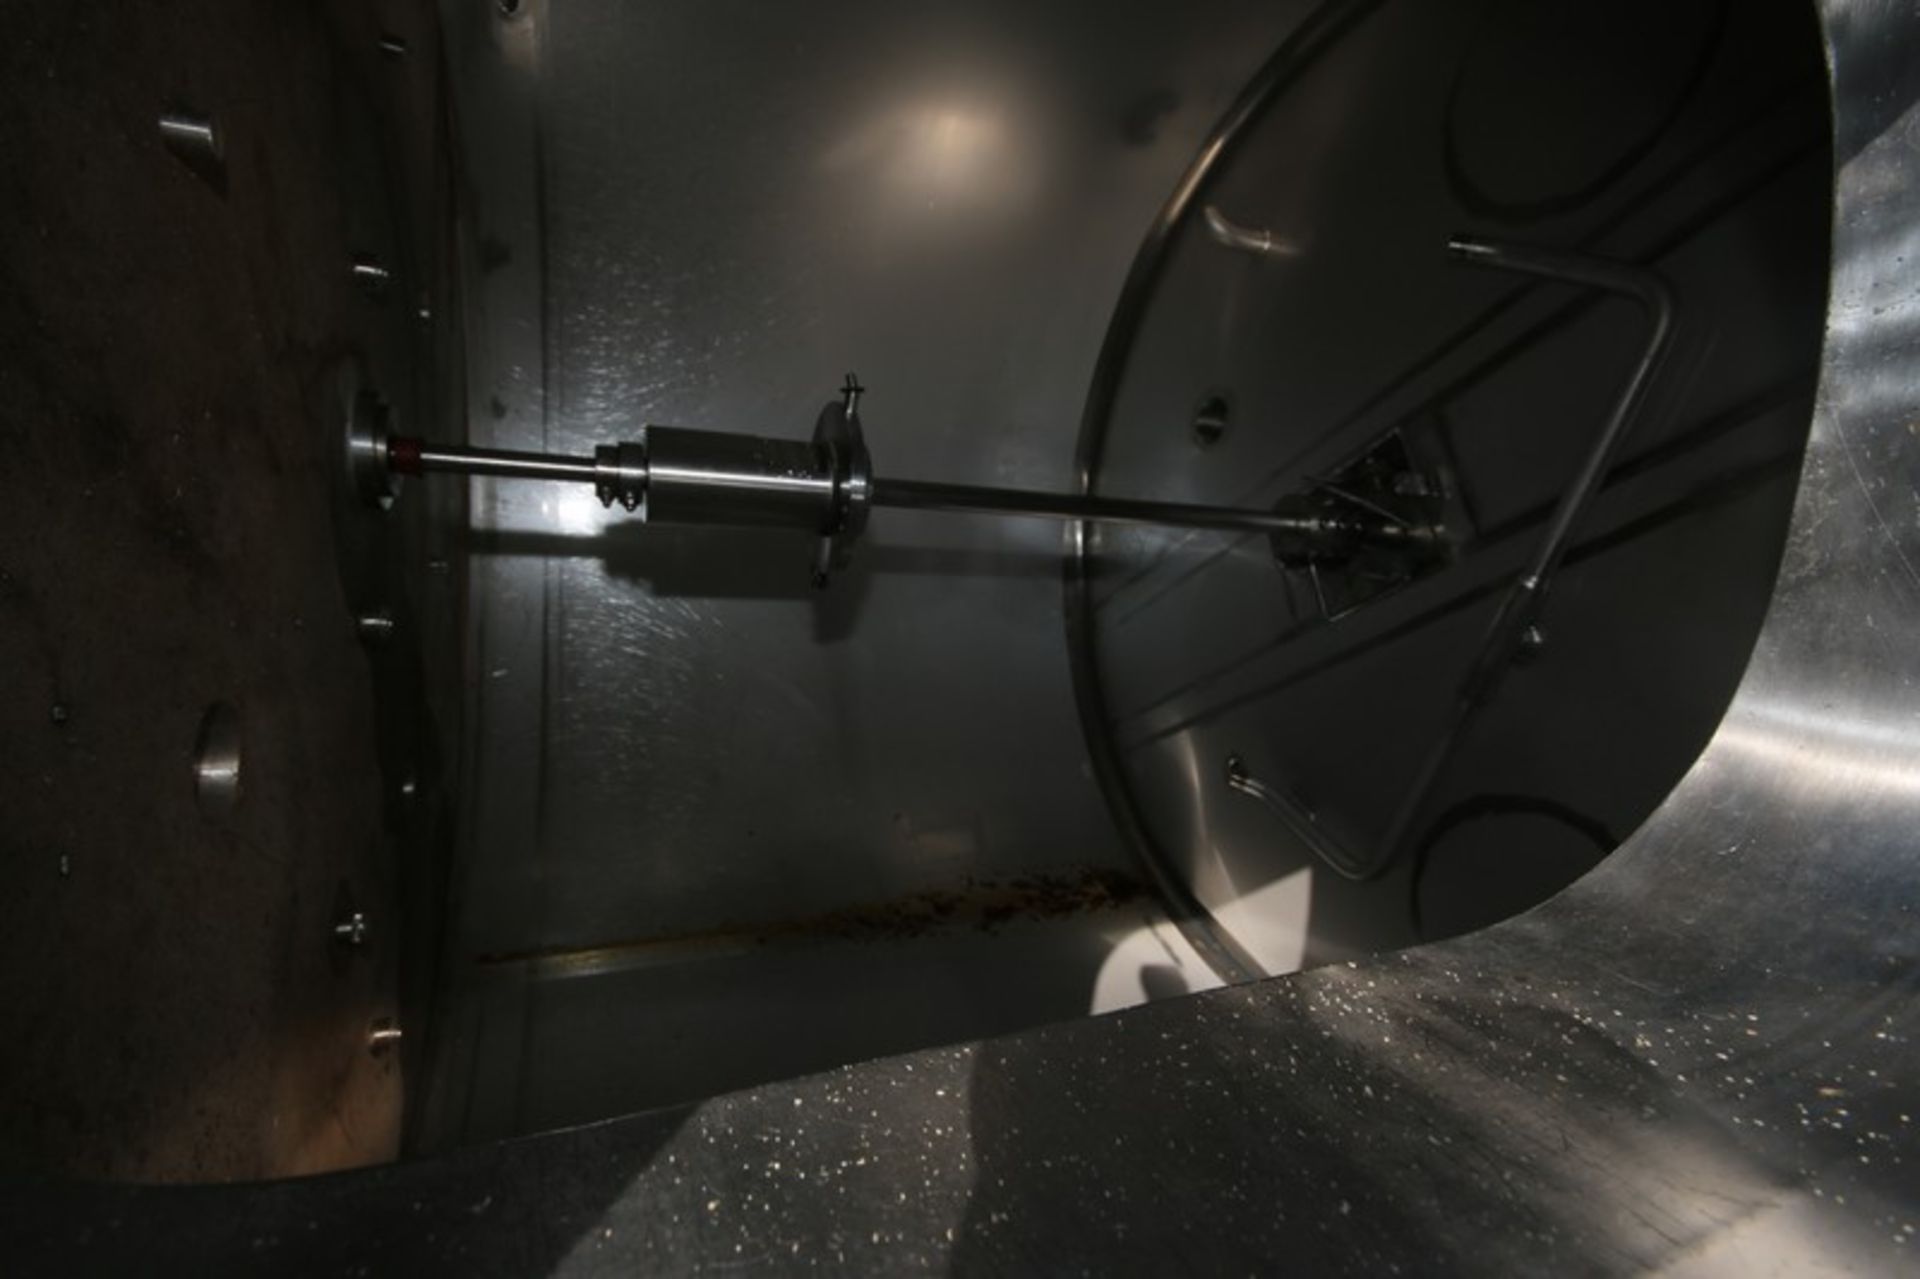 Munker/Braulogistik 15hL Combination Mash Tun/Kettle, M/N Brewhouse, S/N 1, 208 Volts, 3 Phase, with - Image 13 of 24